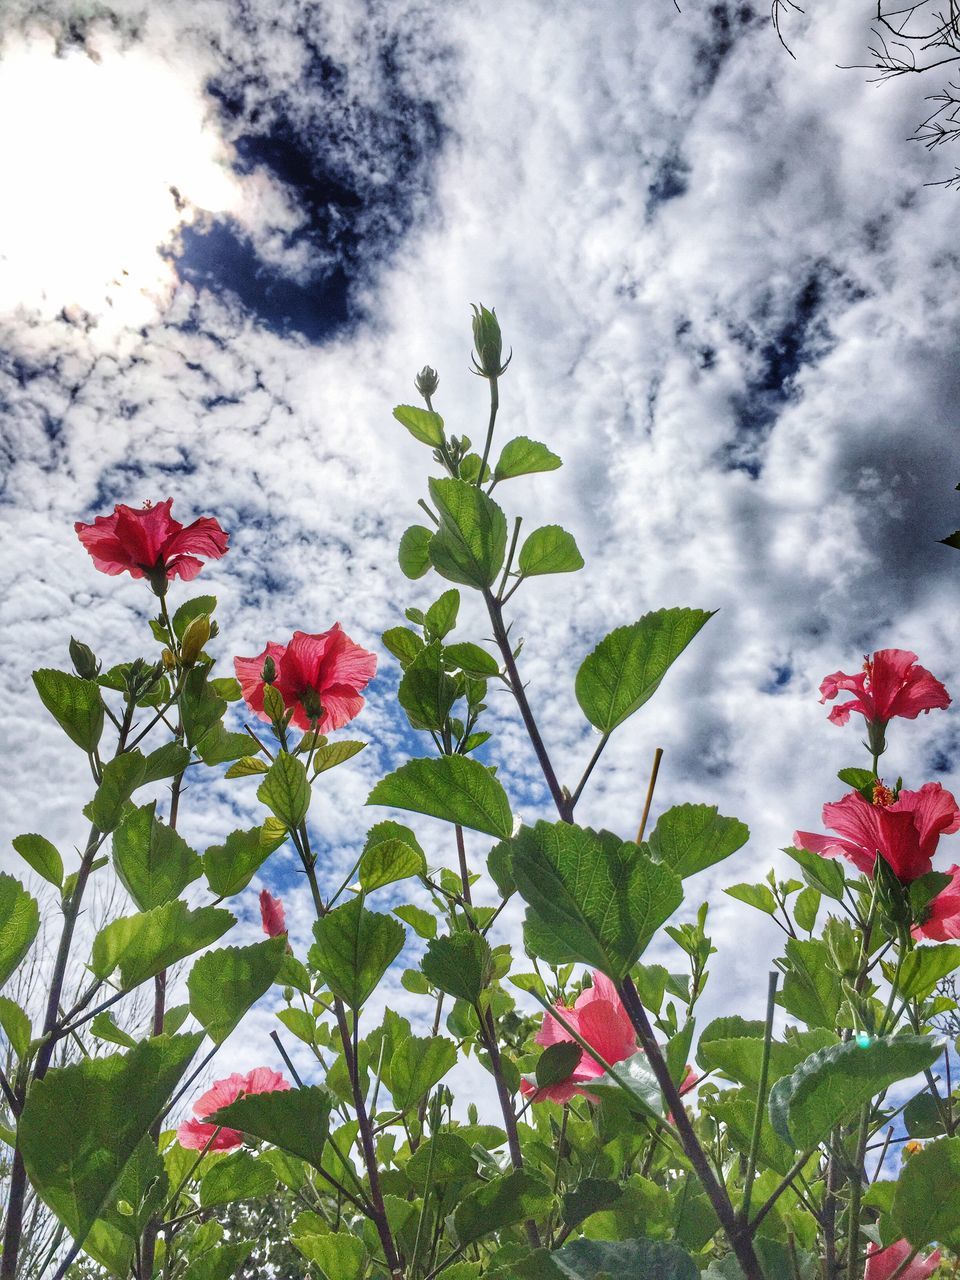 flower, growth, leaf, sky, low angle view, plant, freshness, nature, beauty in nature, fragility, cloud - sky, pink color, red, tree, branch, day, cloudy, green color, outdoors, petal